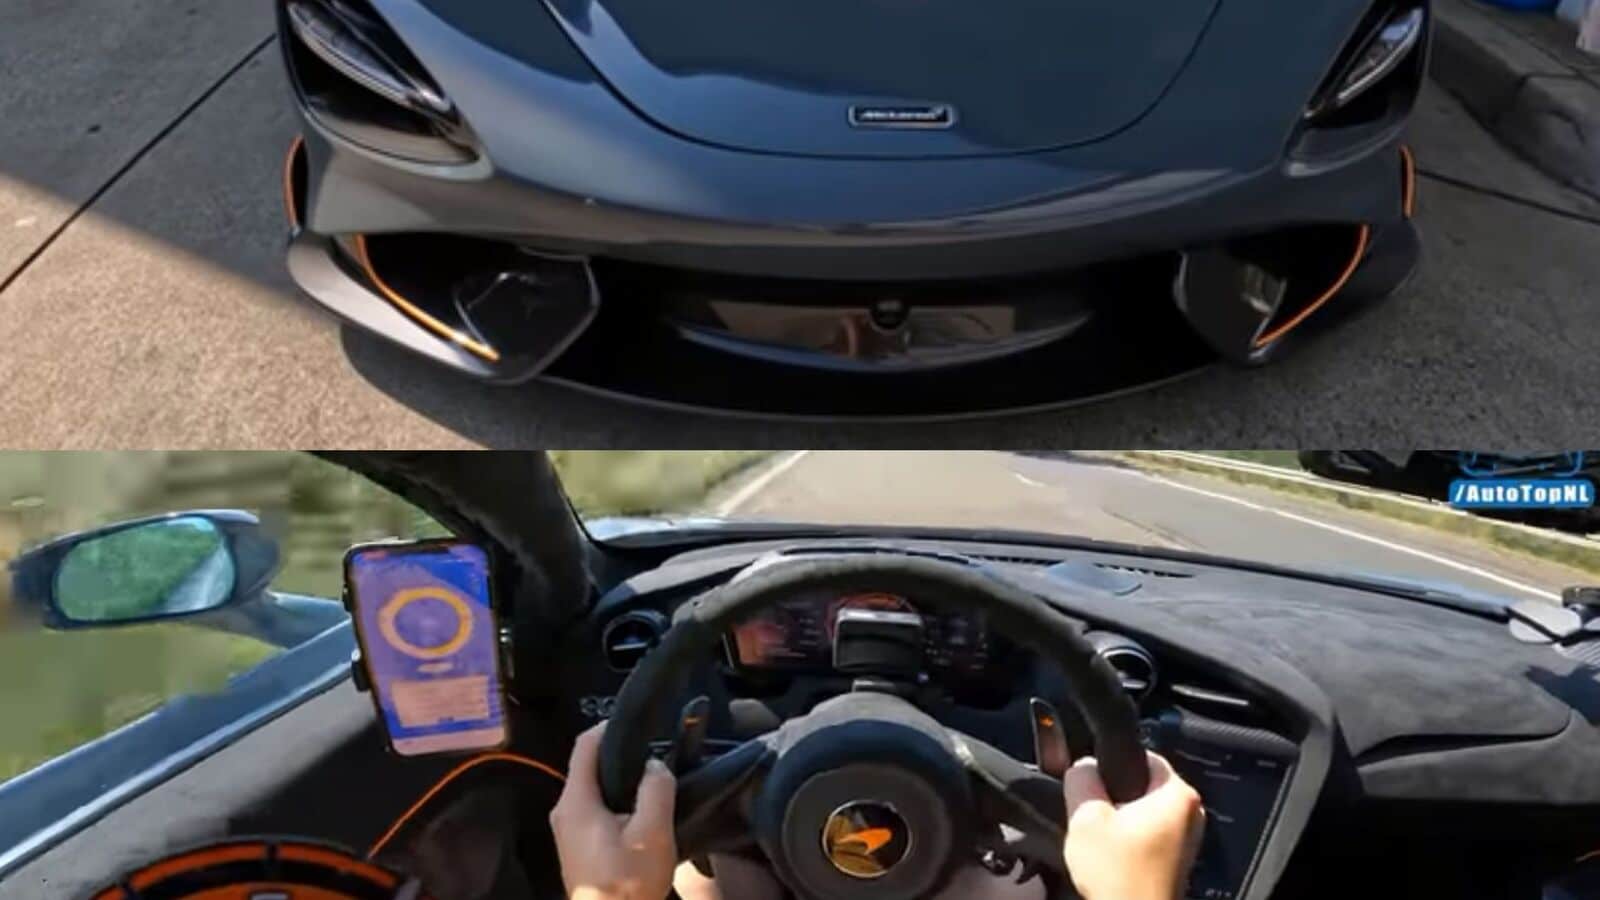 Watch: McLaren races to 325 kmph. And it's legal. Here's why | HT Auto